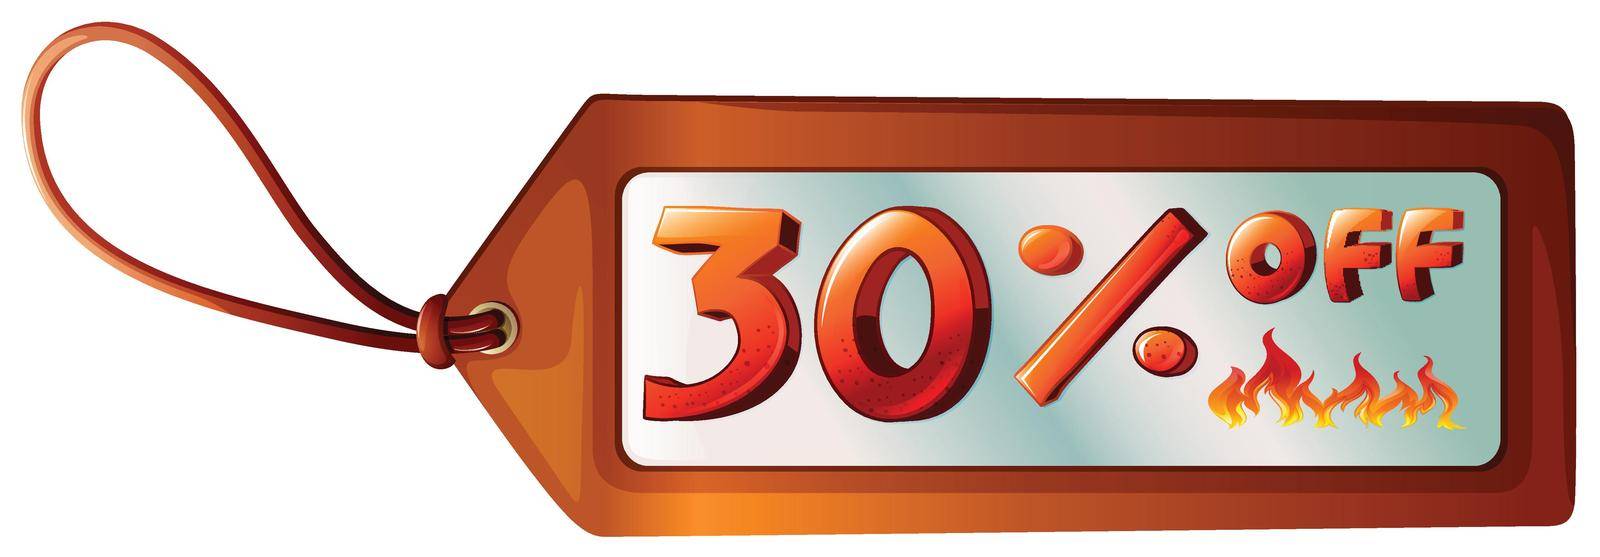 Illustration of a 30 percent off pricetag on a white background